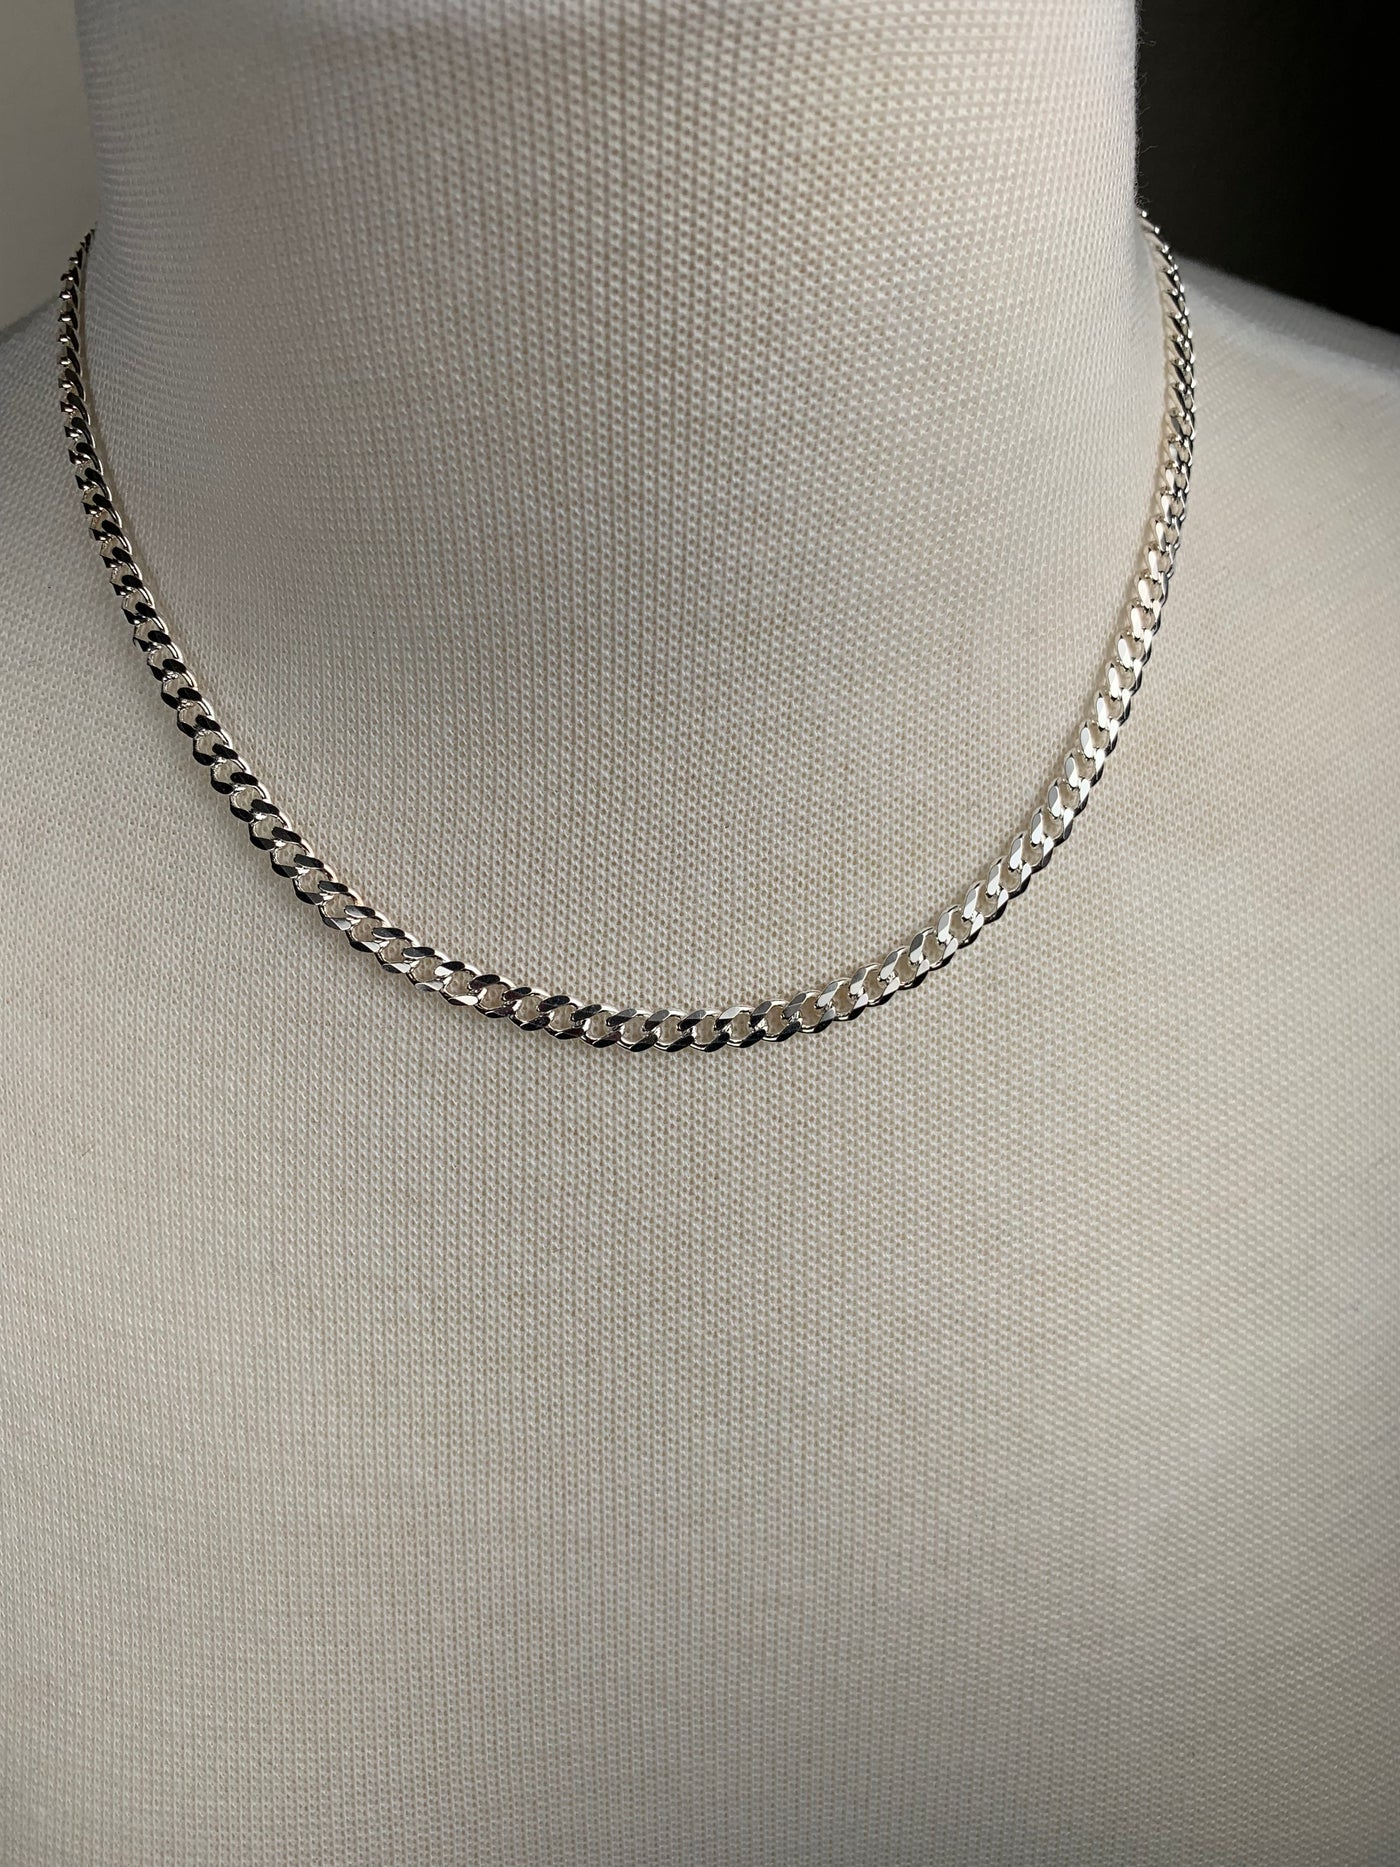 Italian 5mm Curb Chain Necklace in Sterling Silver